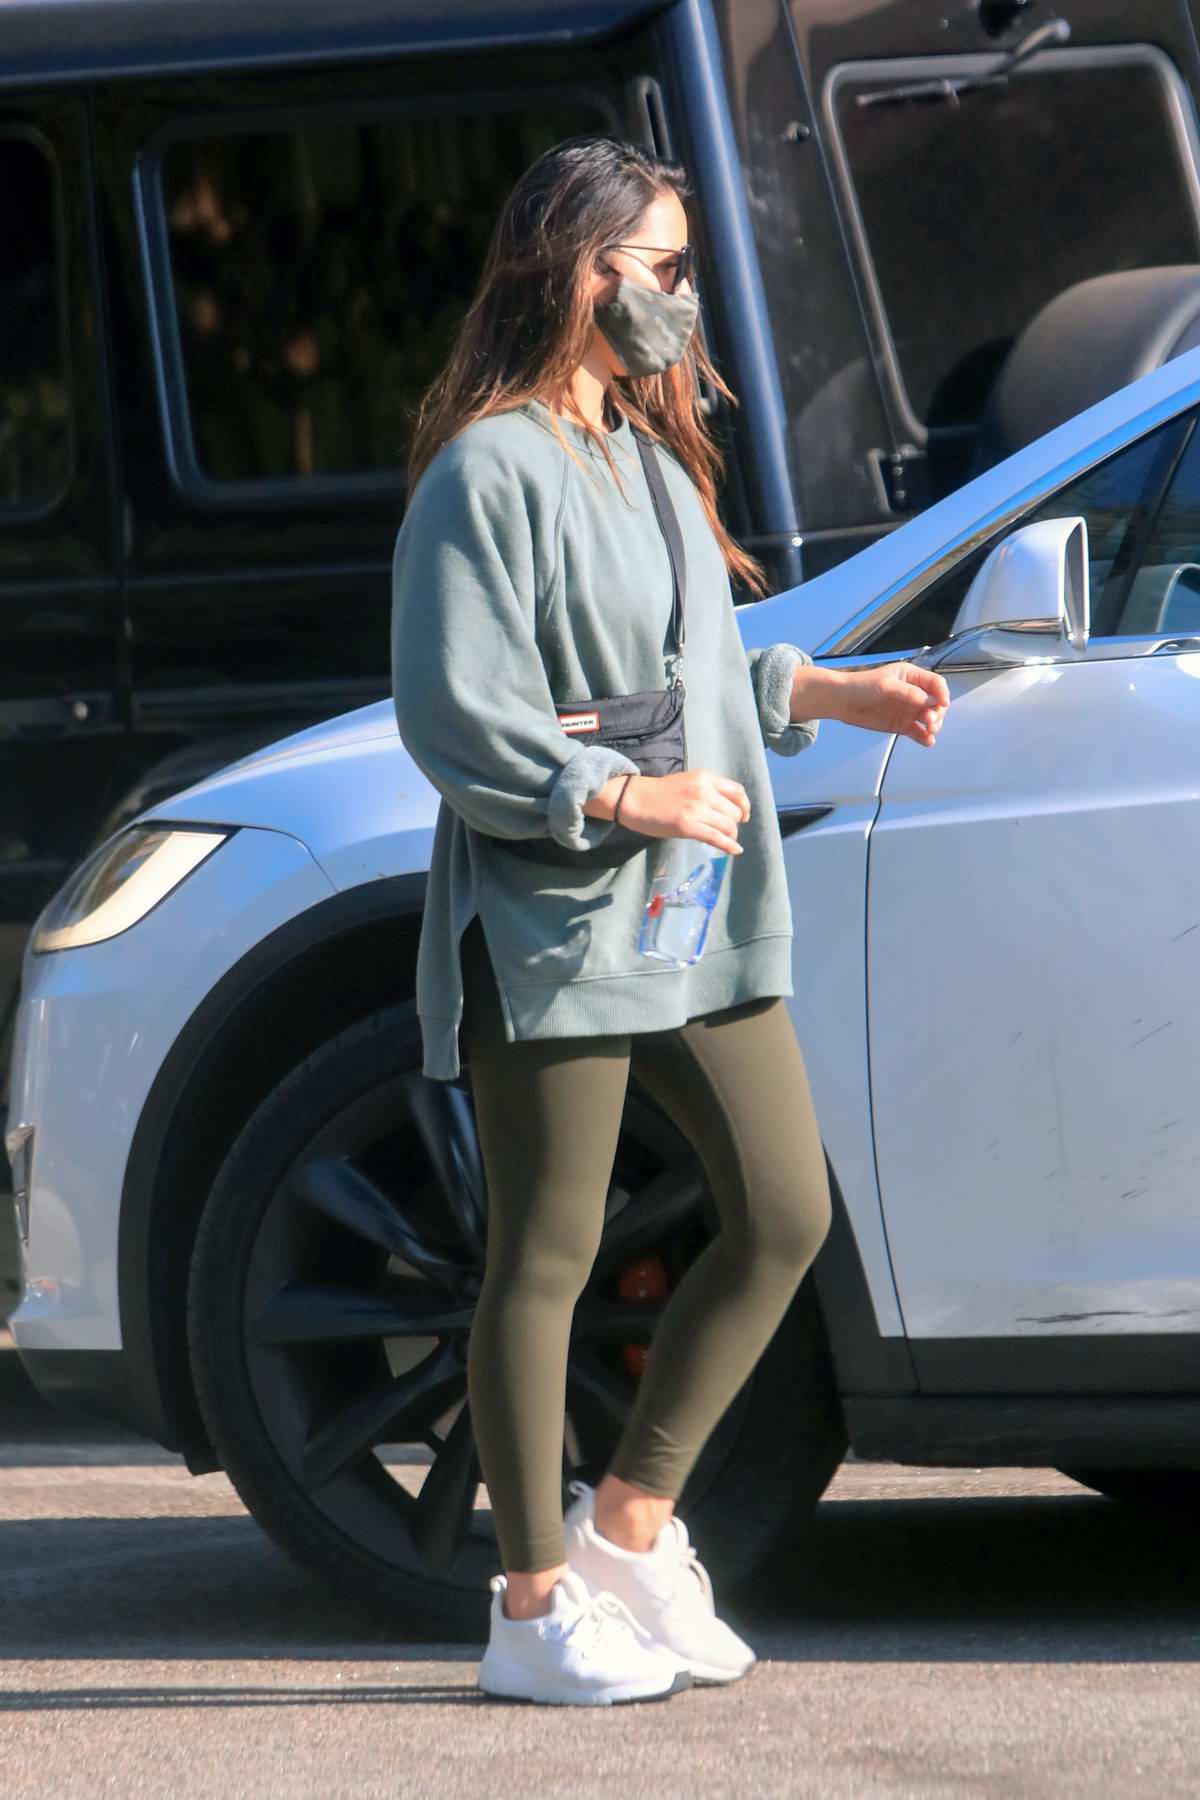 https://www.celebsfirst.com/wp-content/uploads/2020/10/olivia-munn-spotted-in-a-oversized-sweatshirt-and-leggings-as-she-leaves-the-gym-in-los-angeles-281020_13.jpg